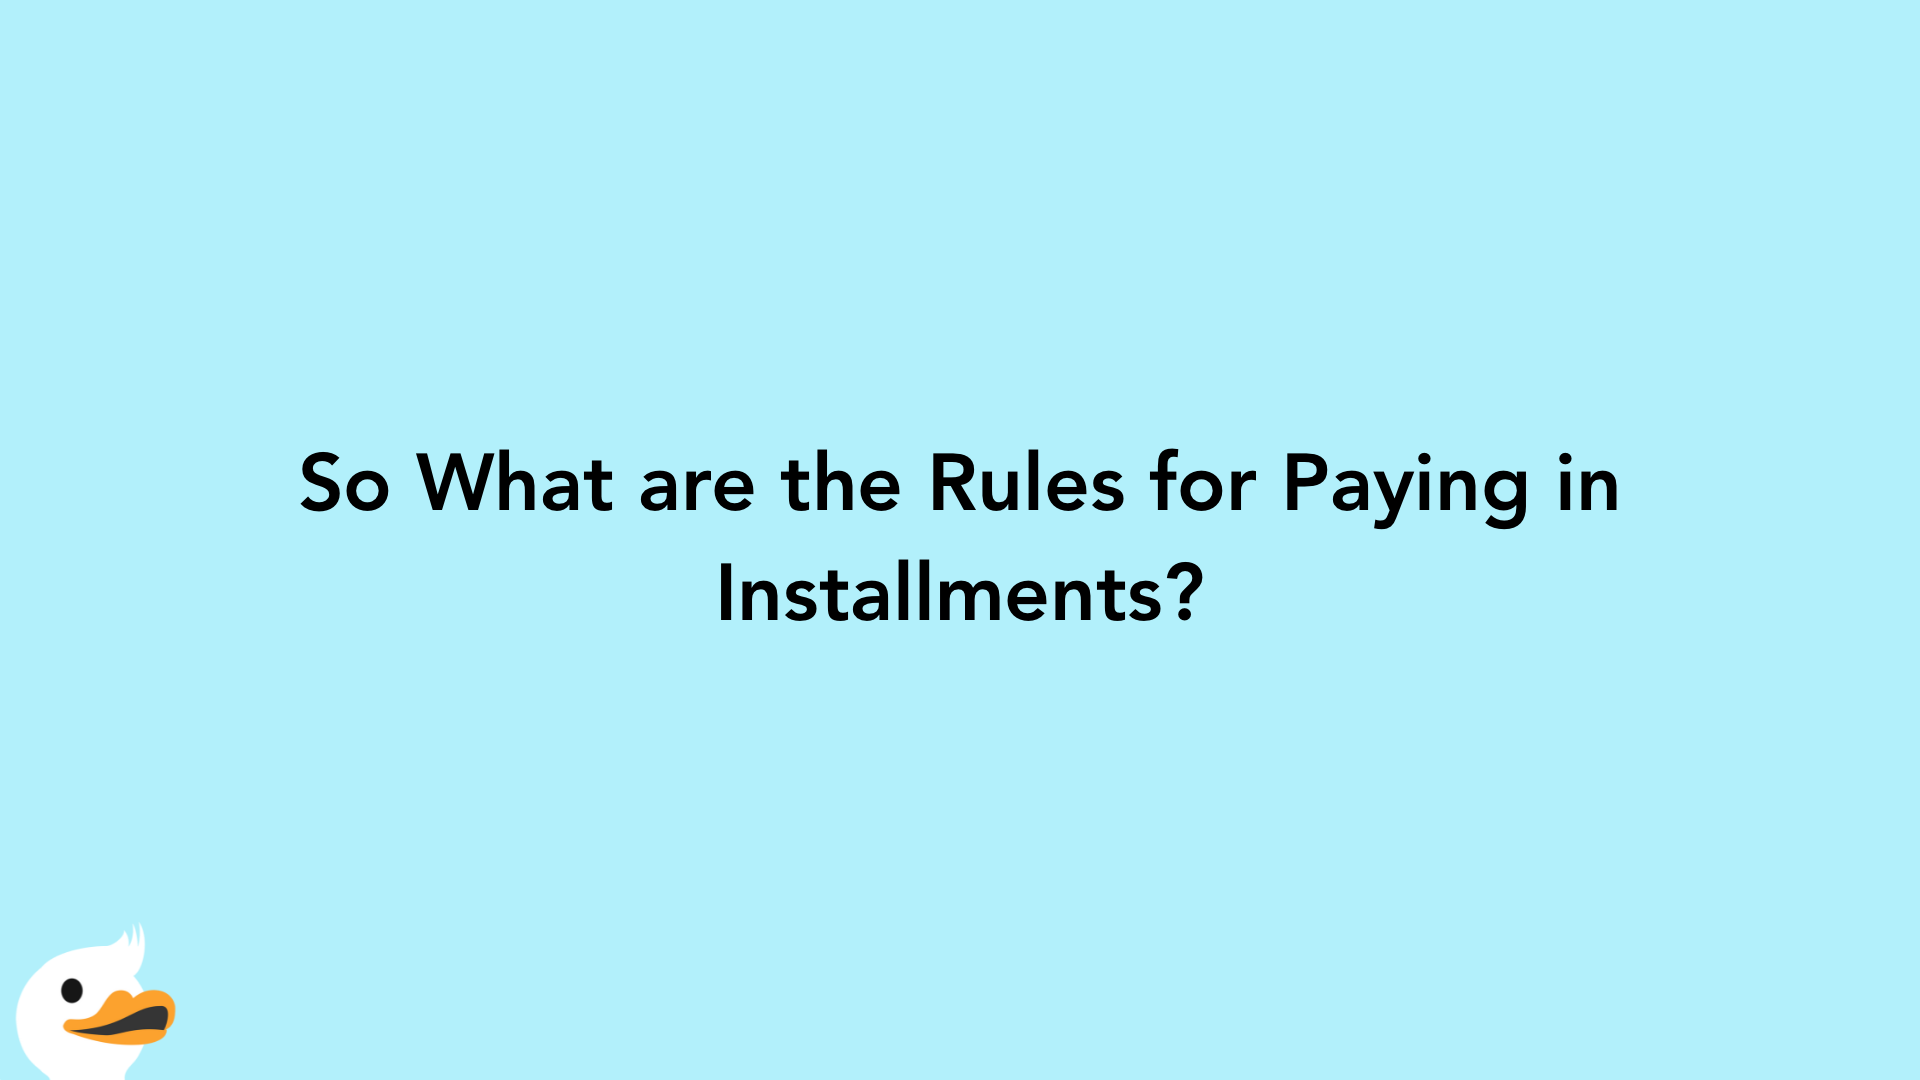 So What are the Rules for Paying in Installments?